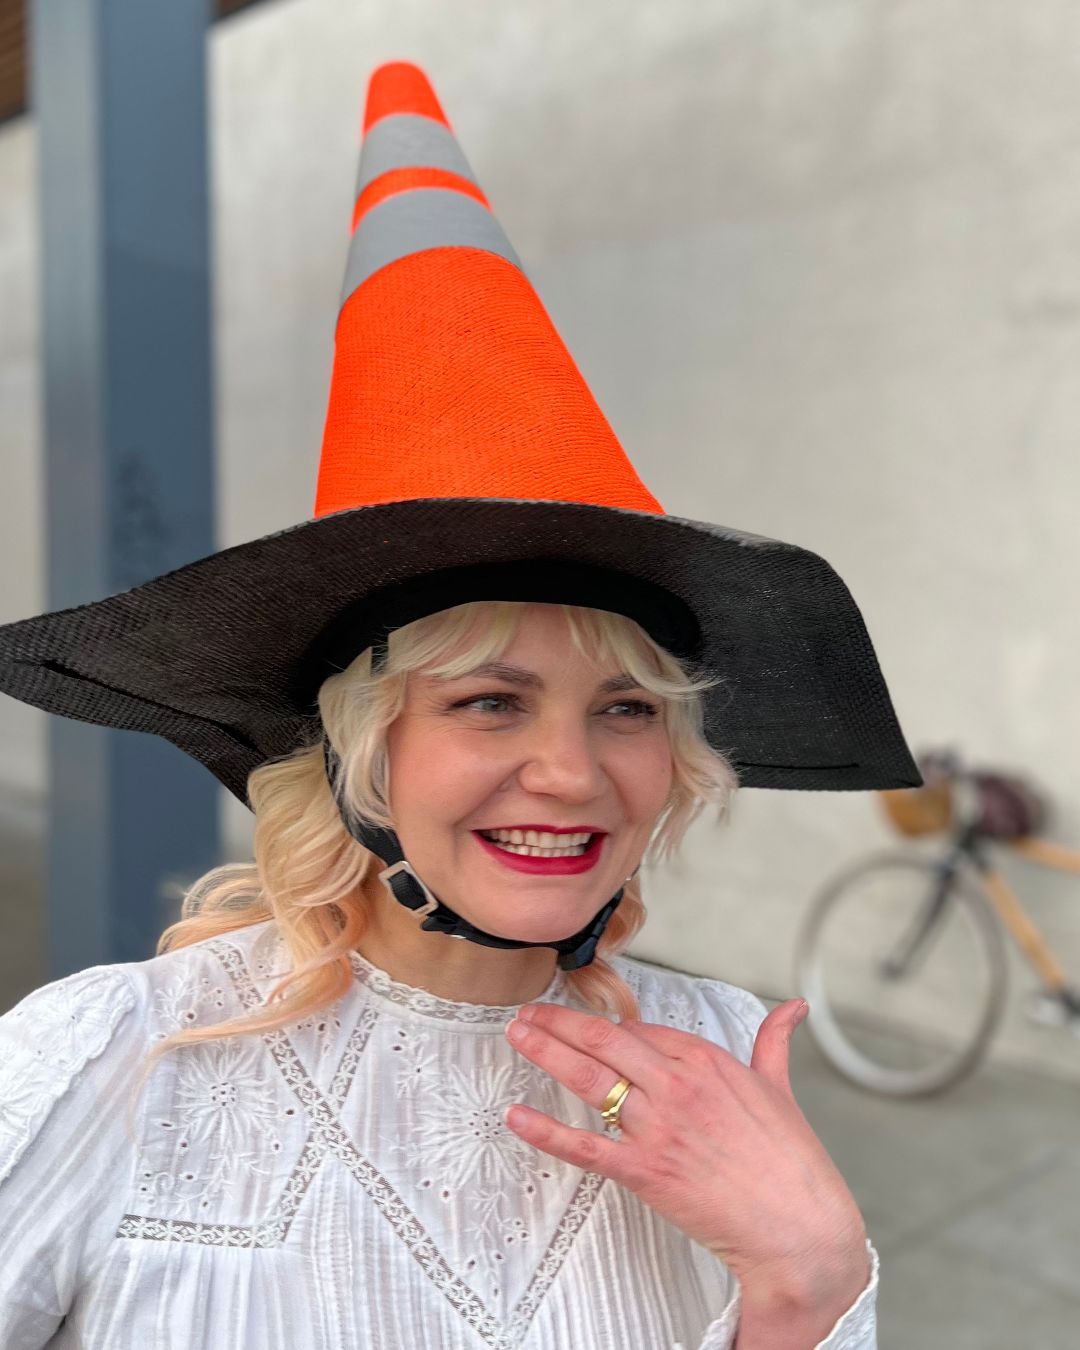 A joyful blonde woman, donning a whimsical helmet resembling a traffic cone, flashes a radiant smile. In the softly blurred background, her bicycle leans against a weathered white wall, adding a sense of adventure to the scene.